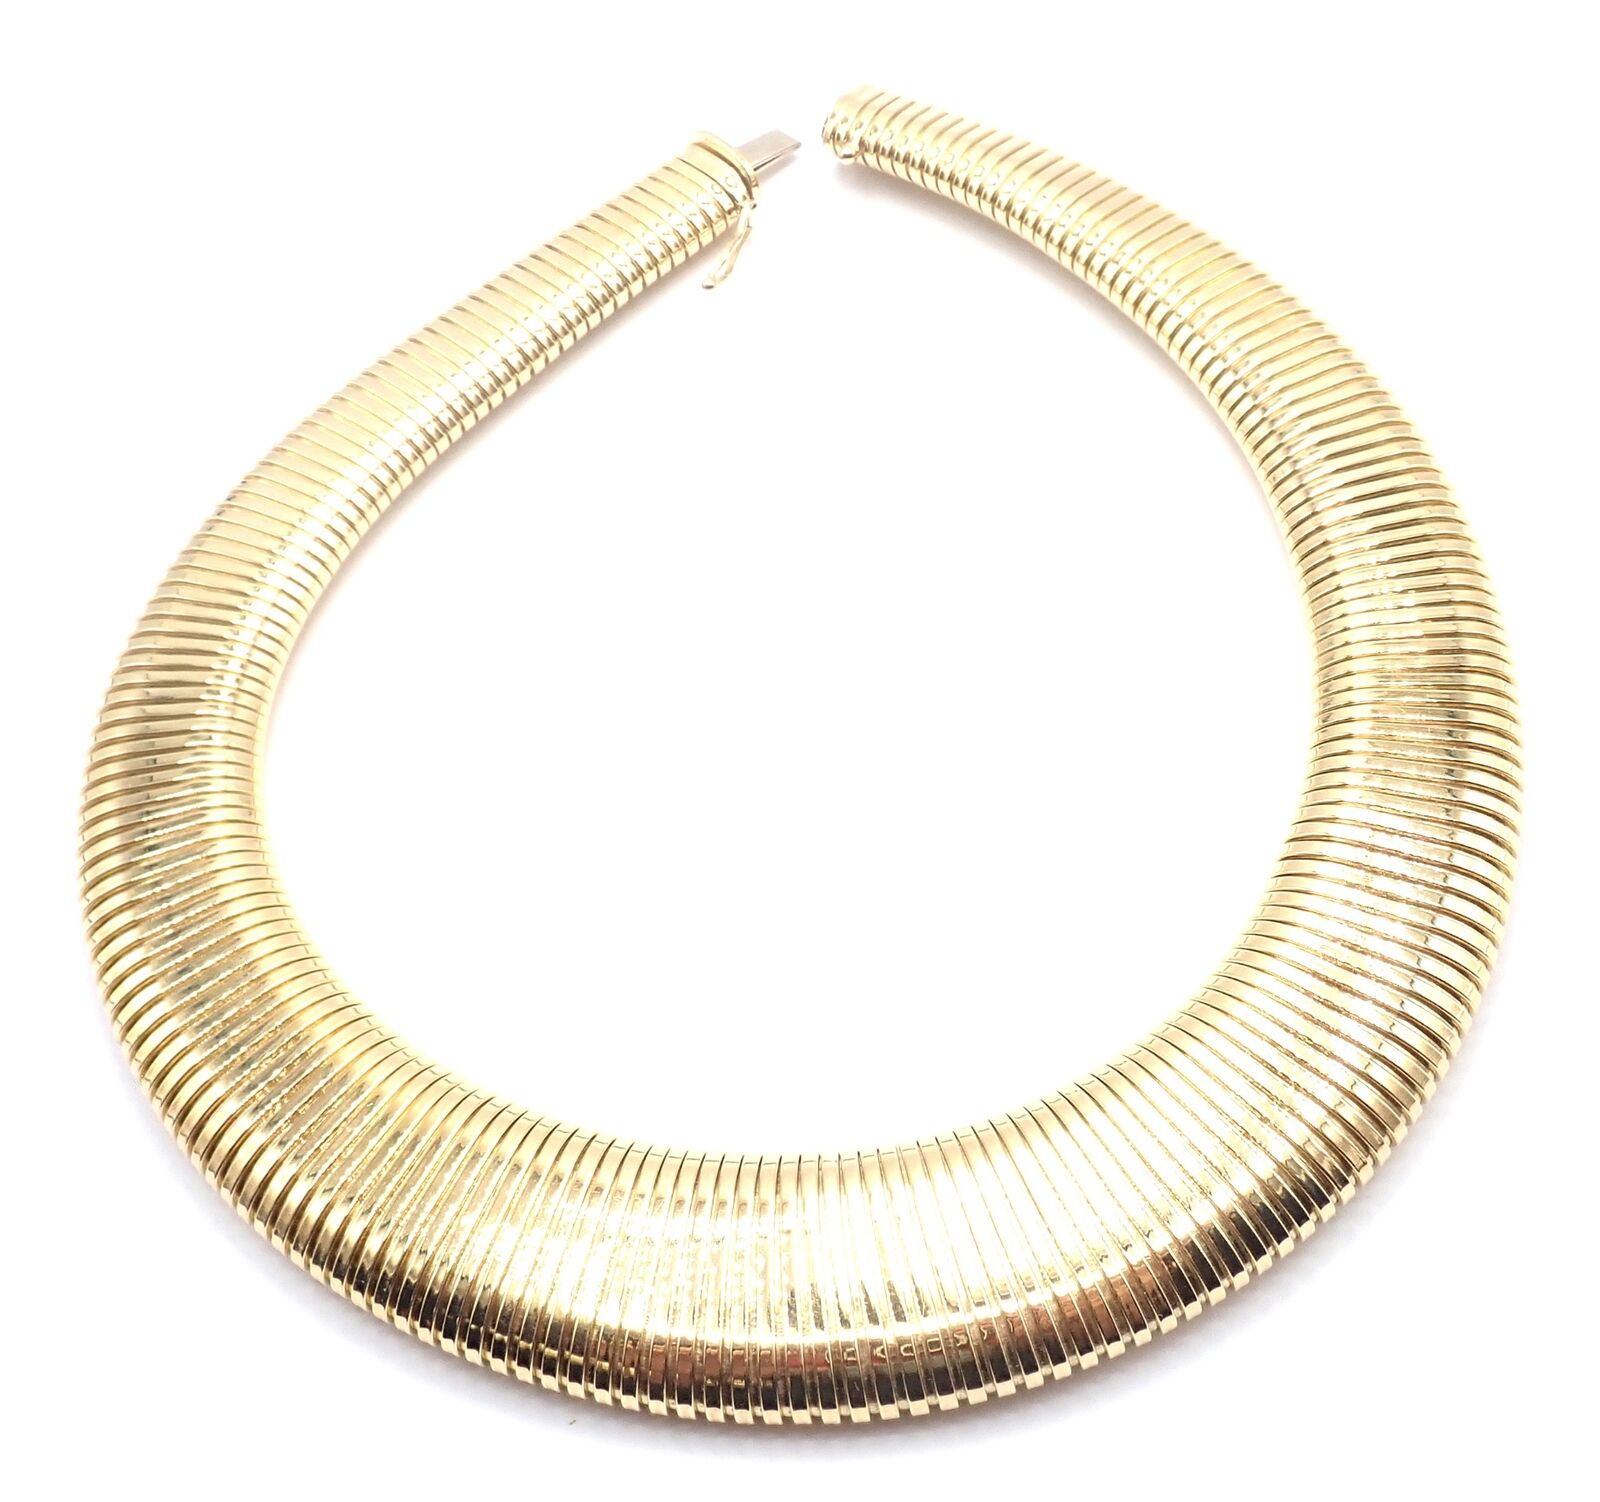 Authentic! Vintage Cartier Tubogas 18k Yellow Gold Wide Necklace | Fortrove